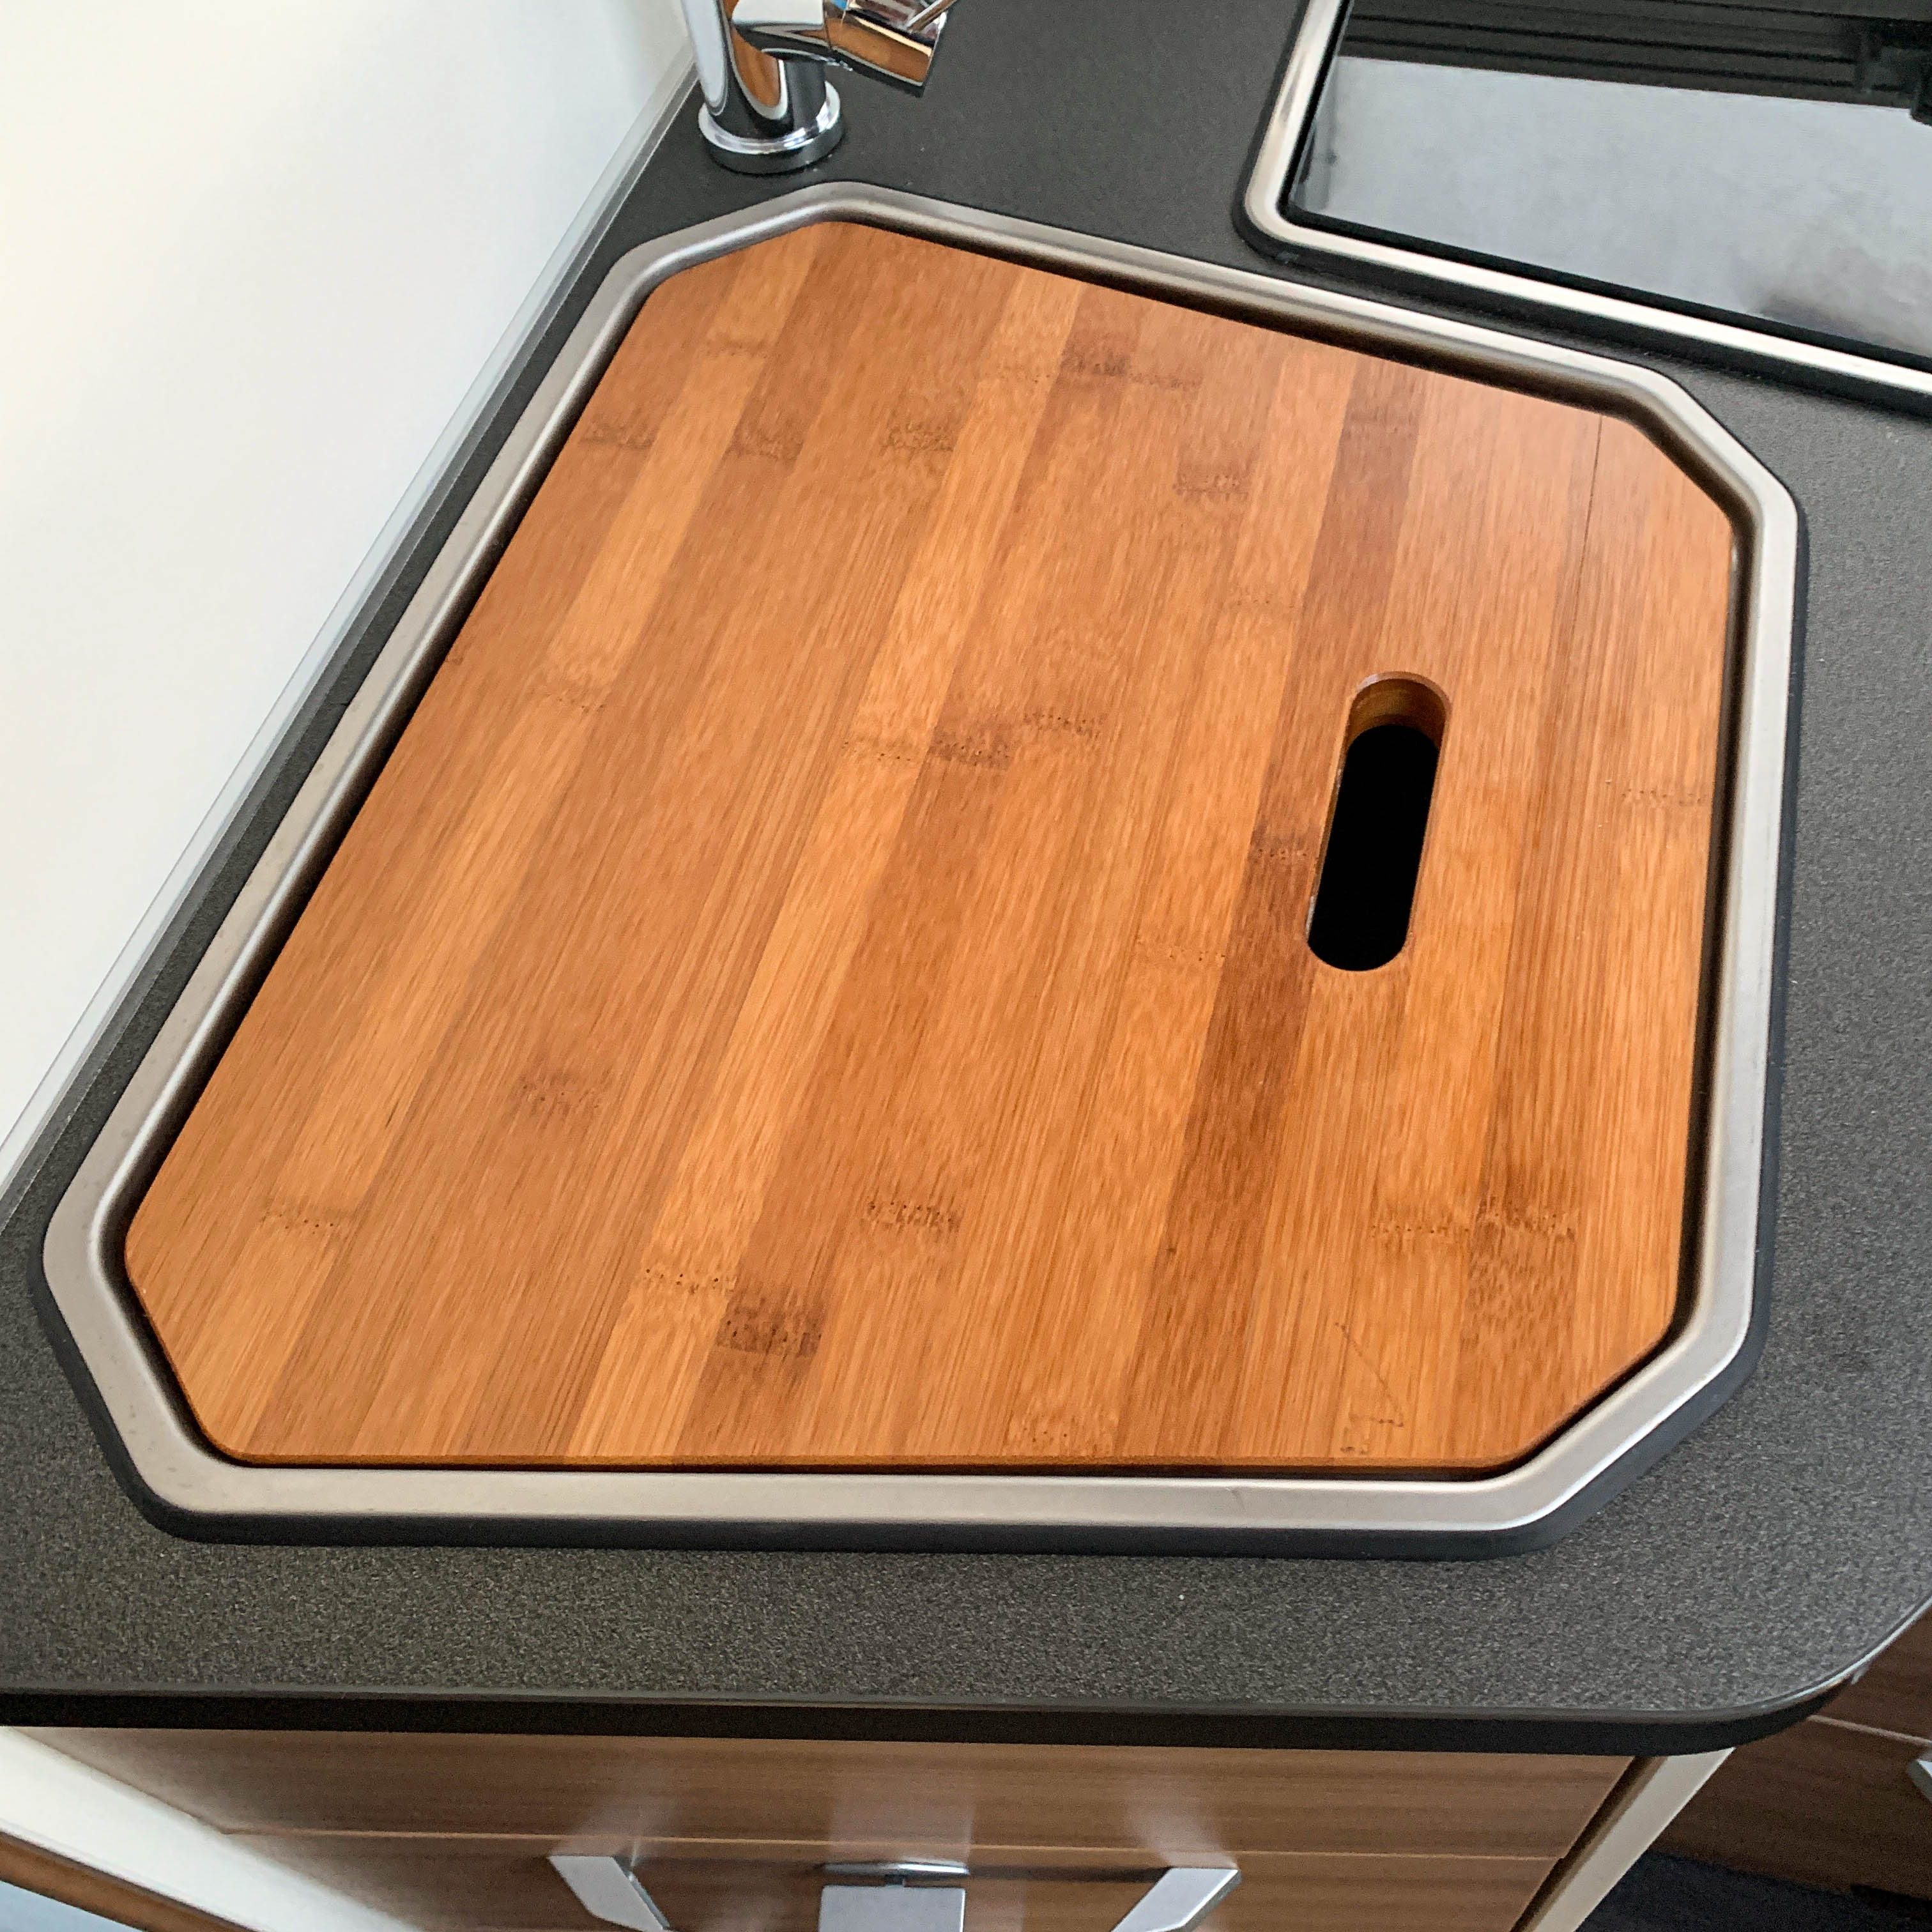 Cutting board with sink cover for Adria models